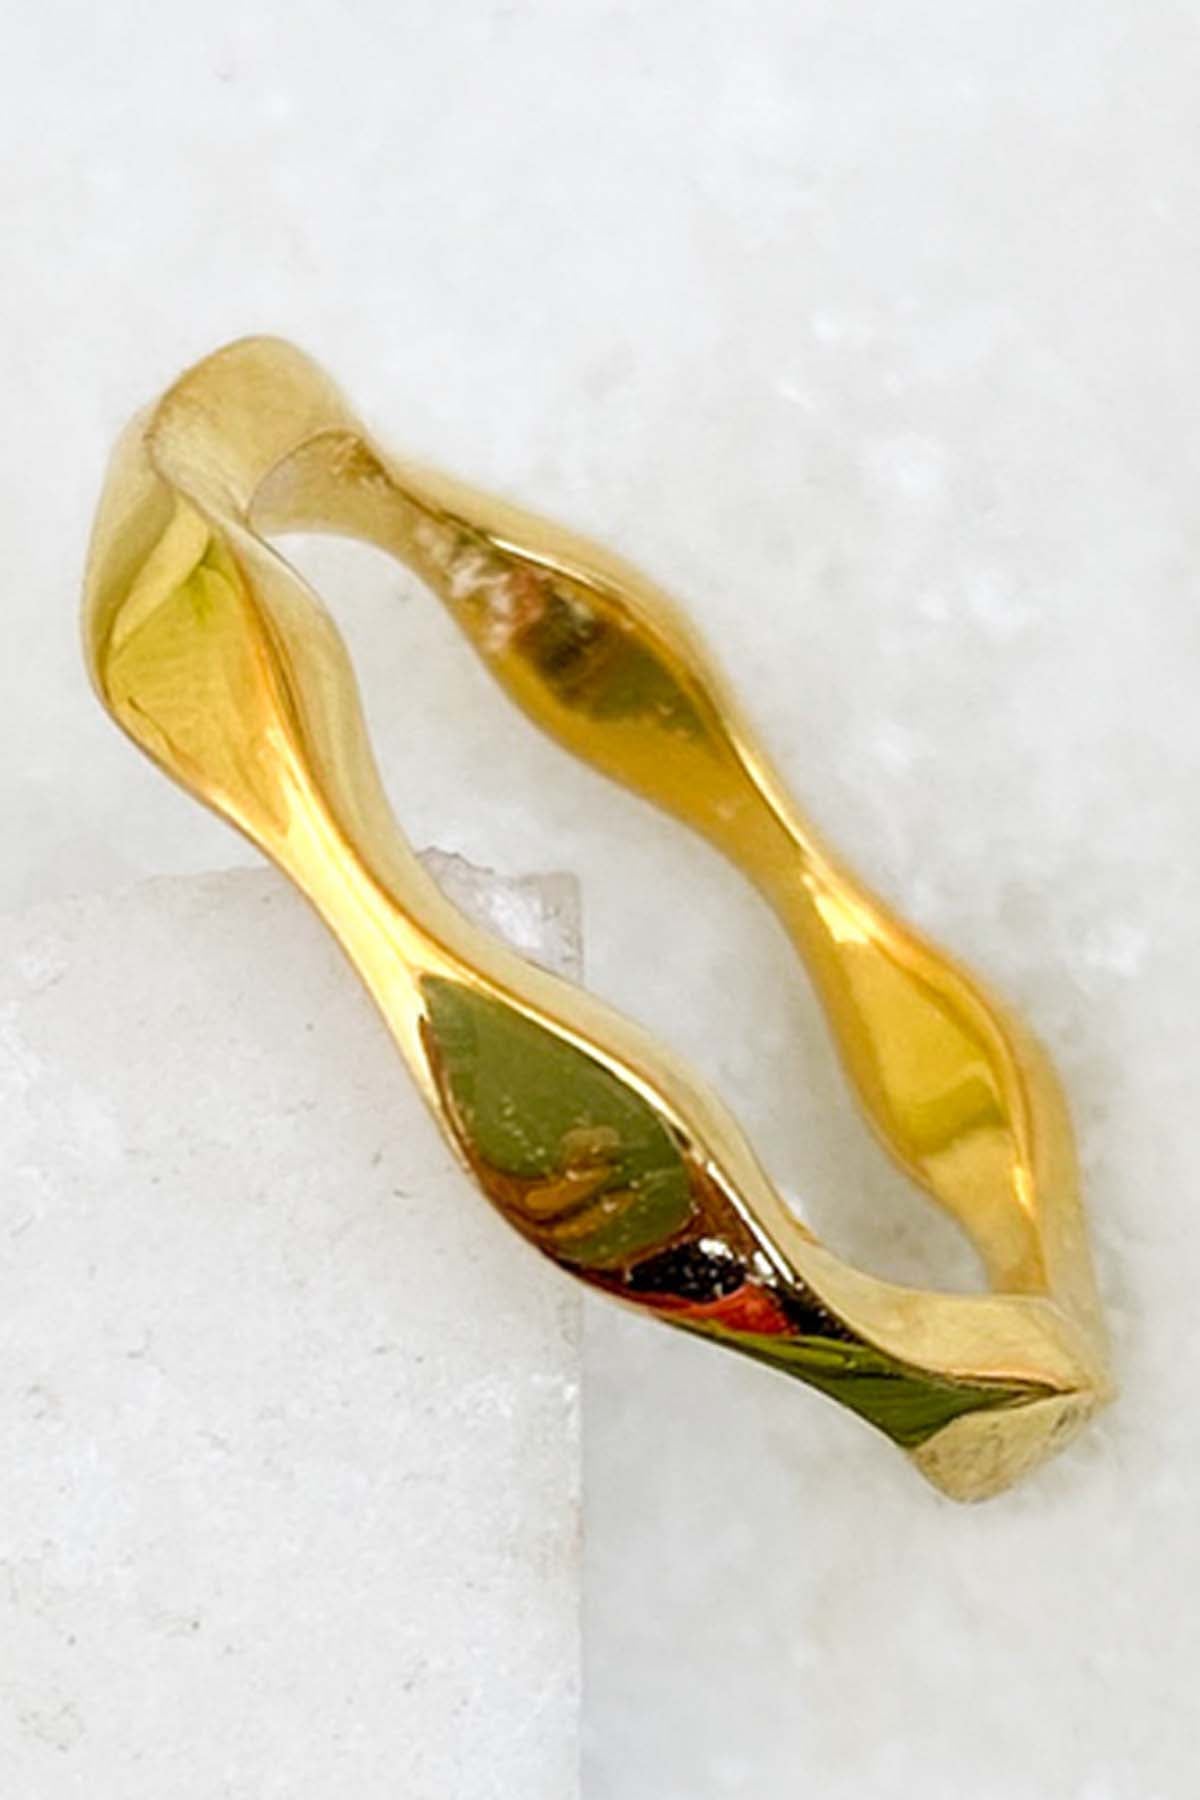 Gold Plated Wave Ring